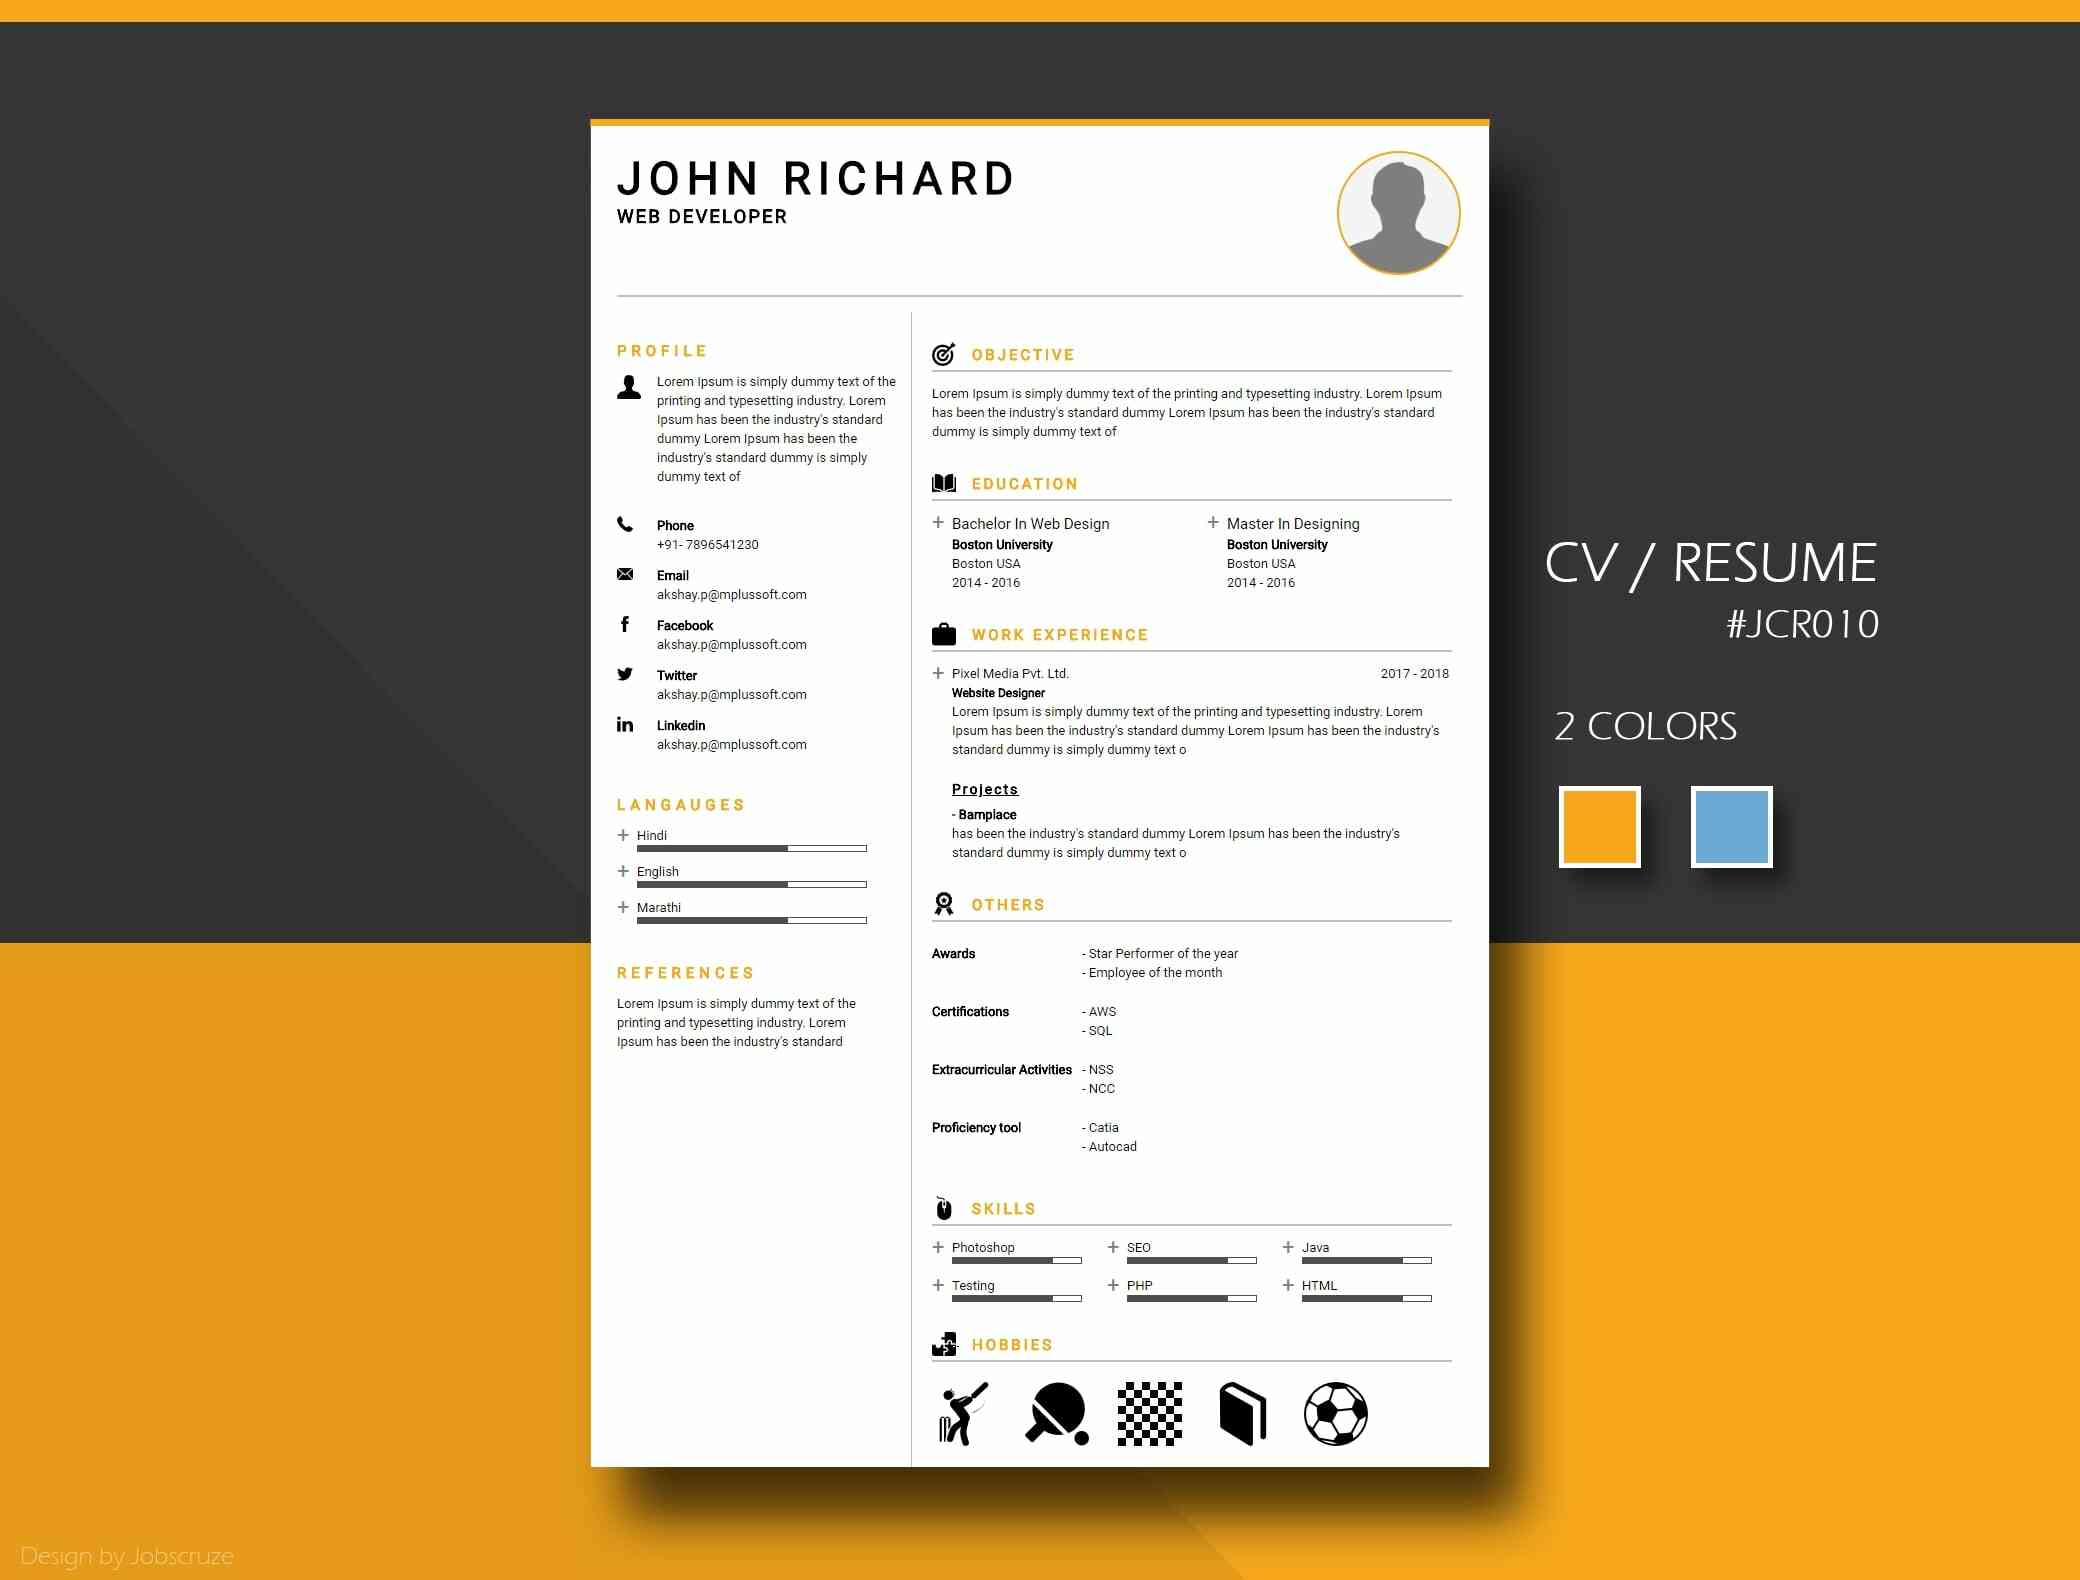 A professional resume increases your chances to get hired by 90%?